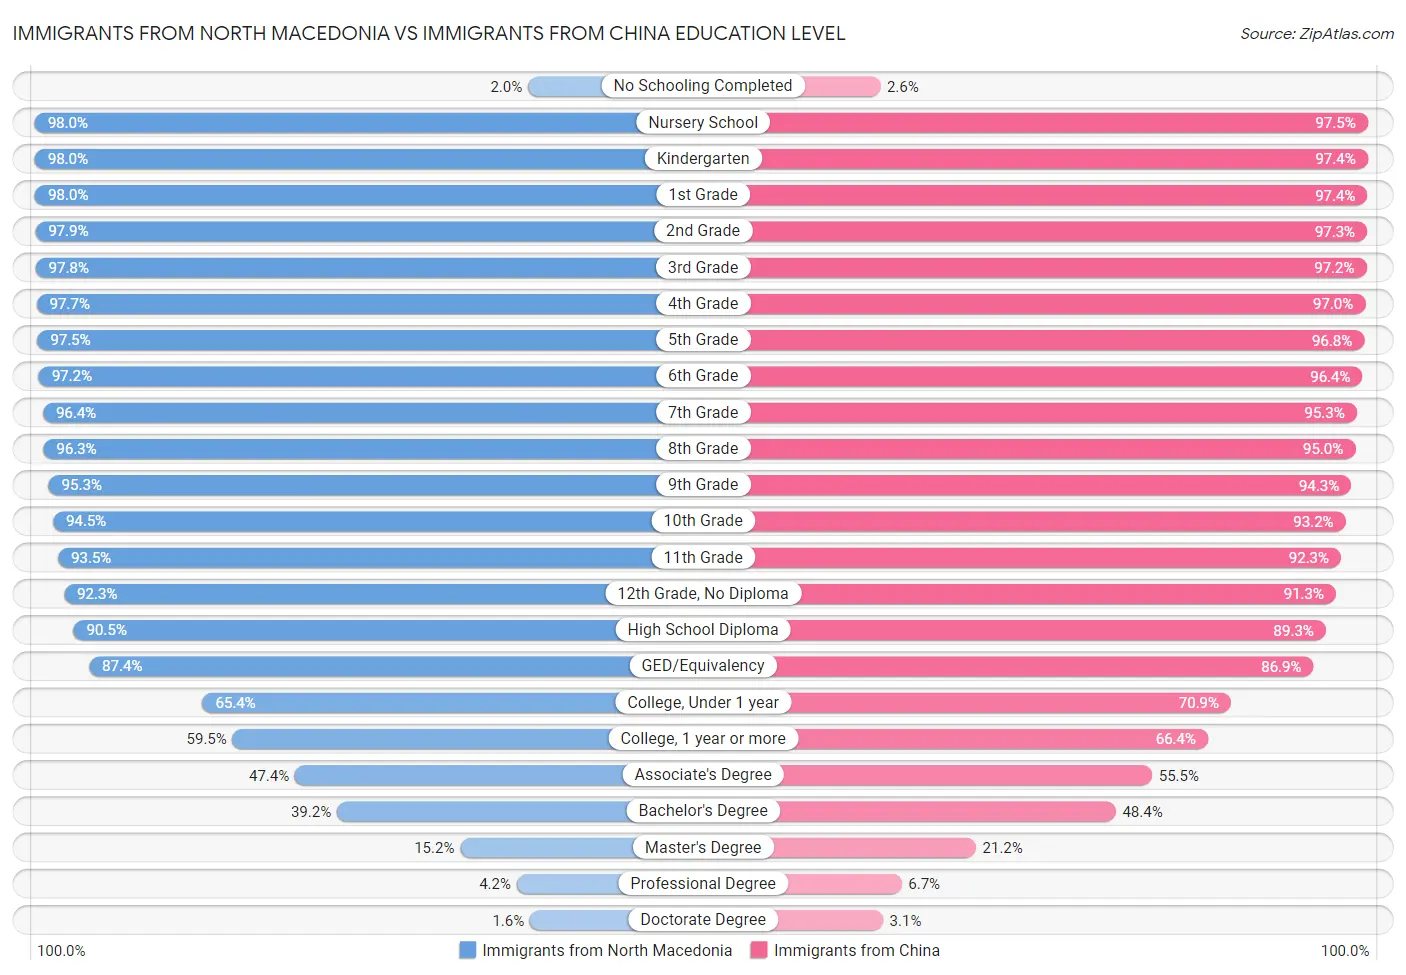 Immigrants from North Macedonia vs Immigrants from China Education Level